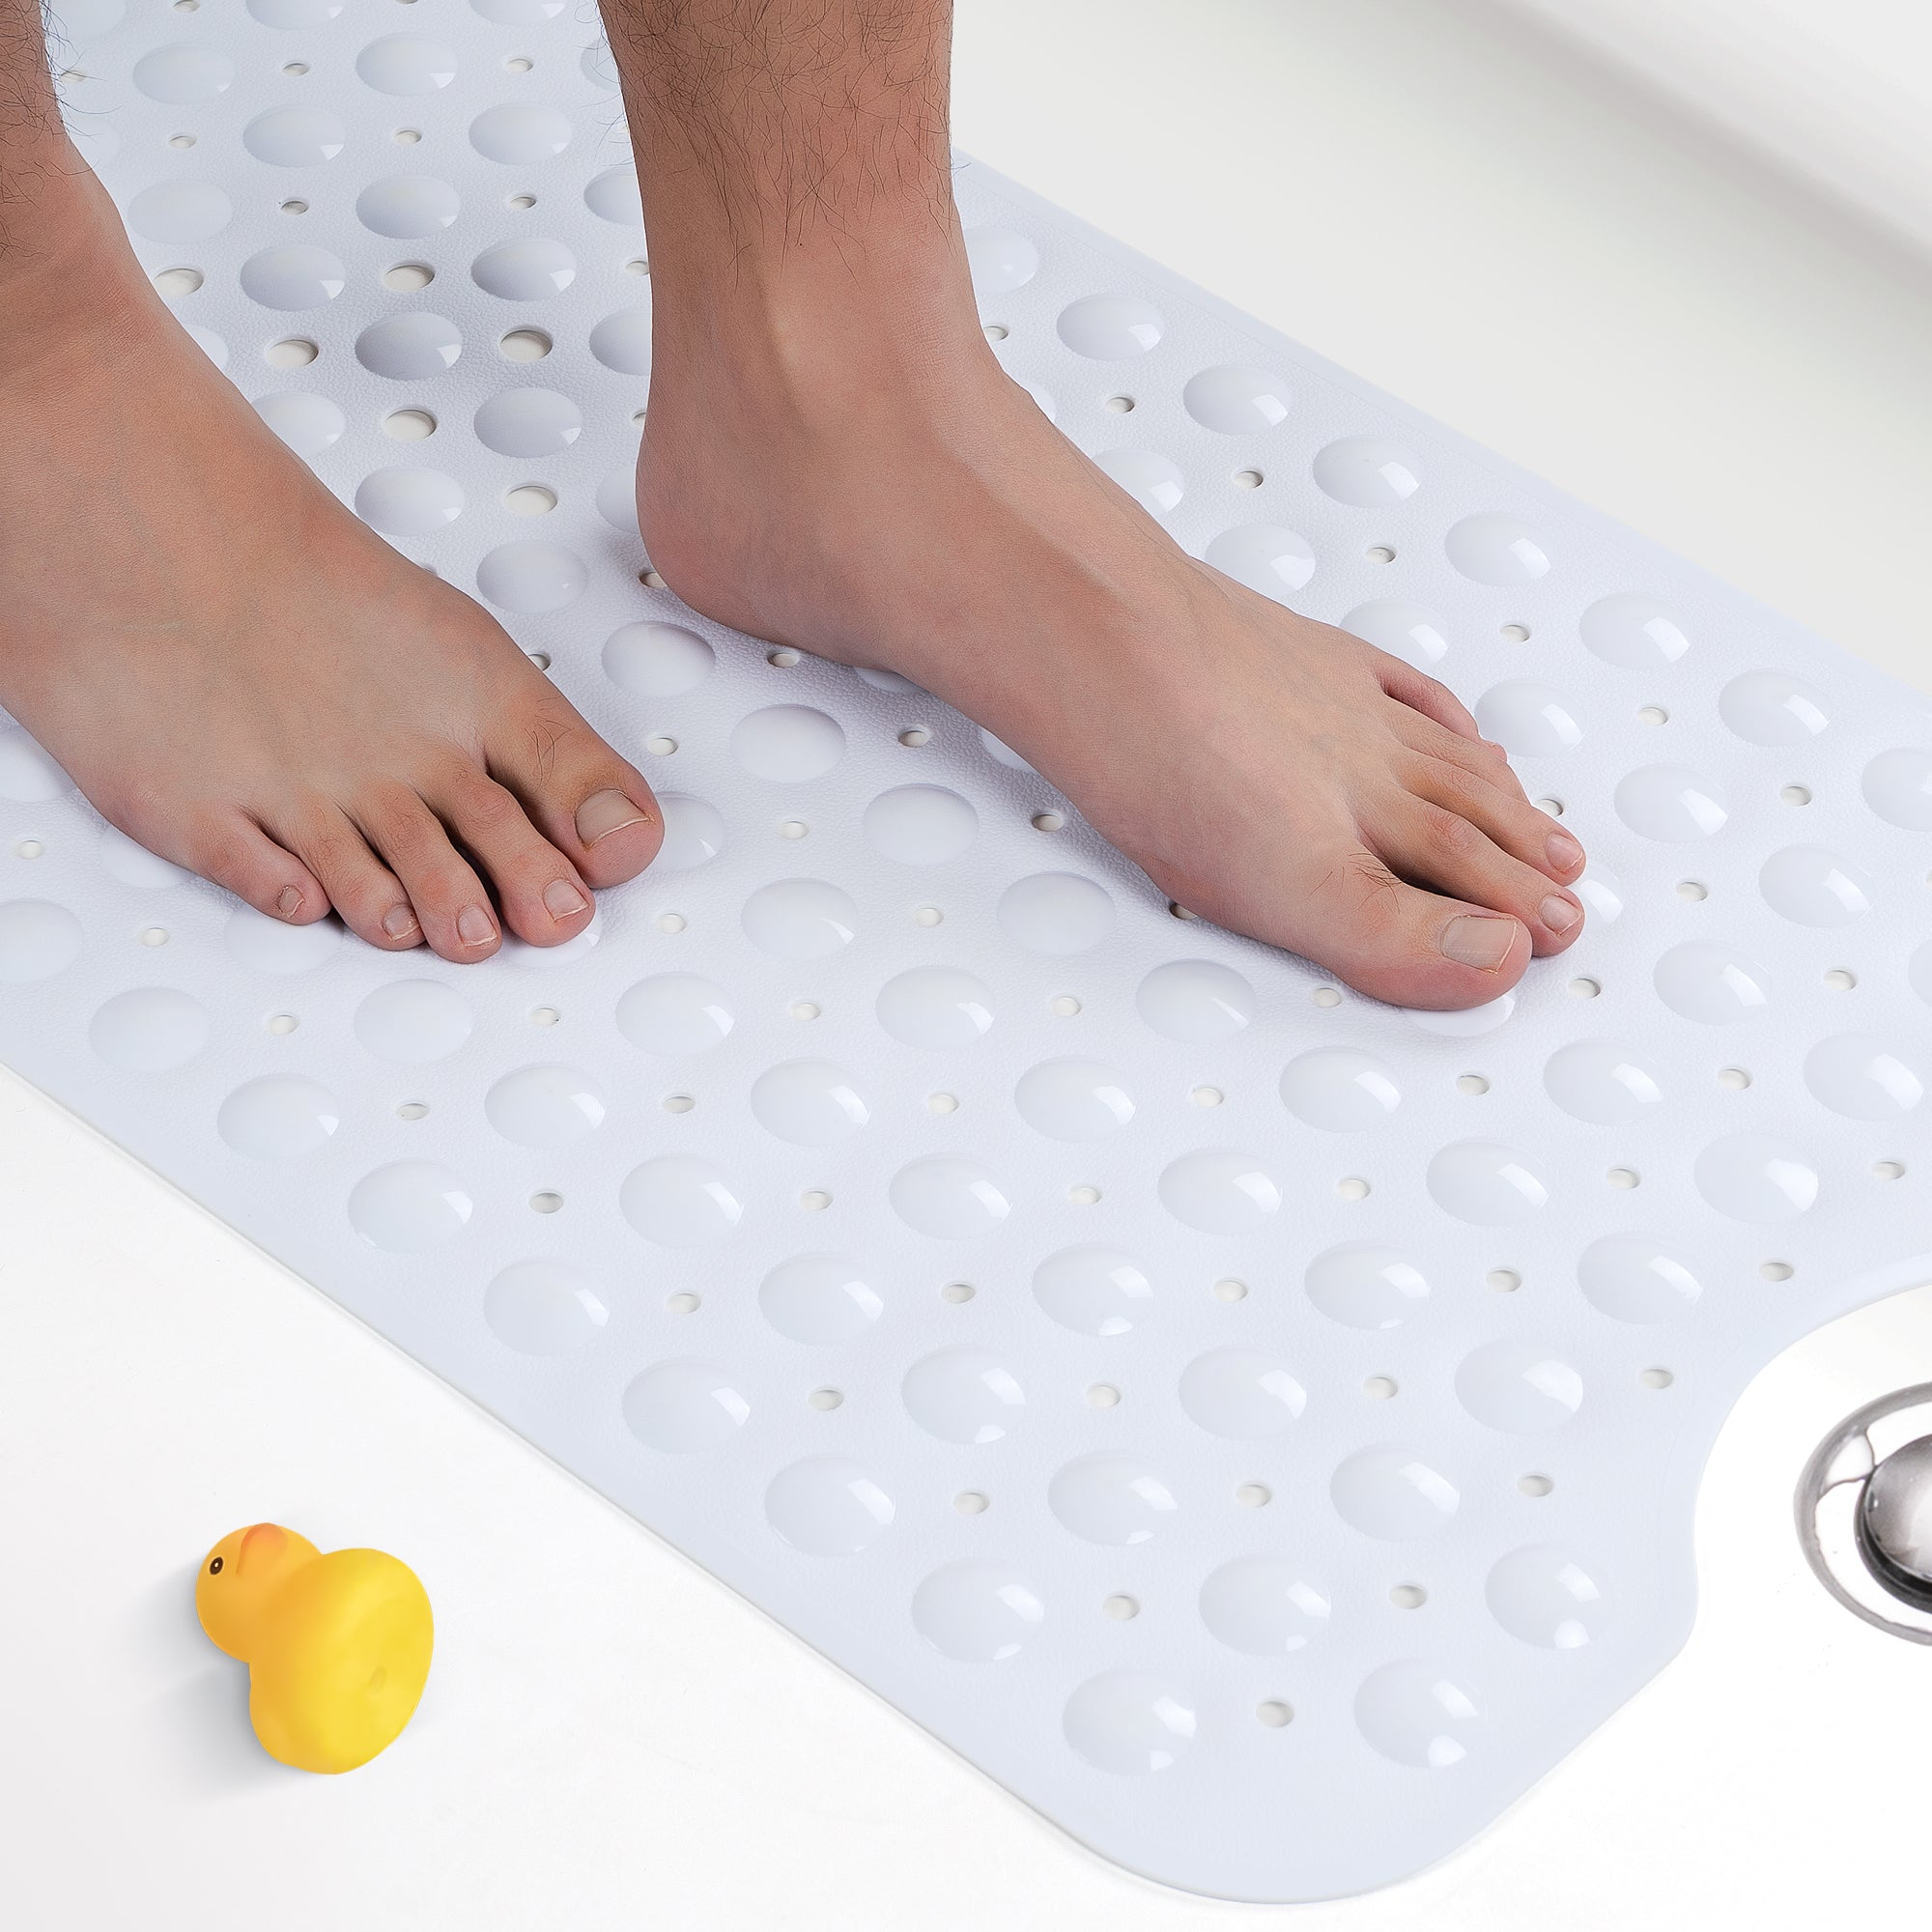 18 CM Round Silicone Bath Mat With Suction Cup, Thickness: 2 CM, Size:  18*18*2 CM